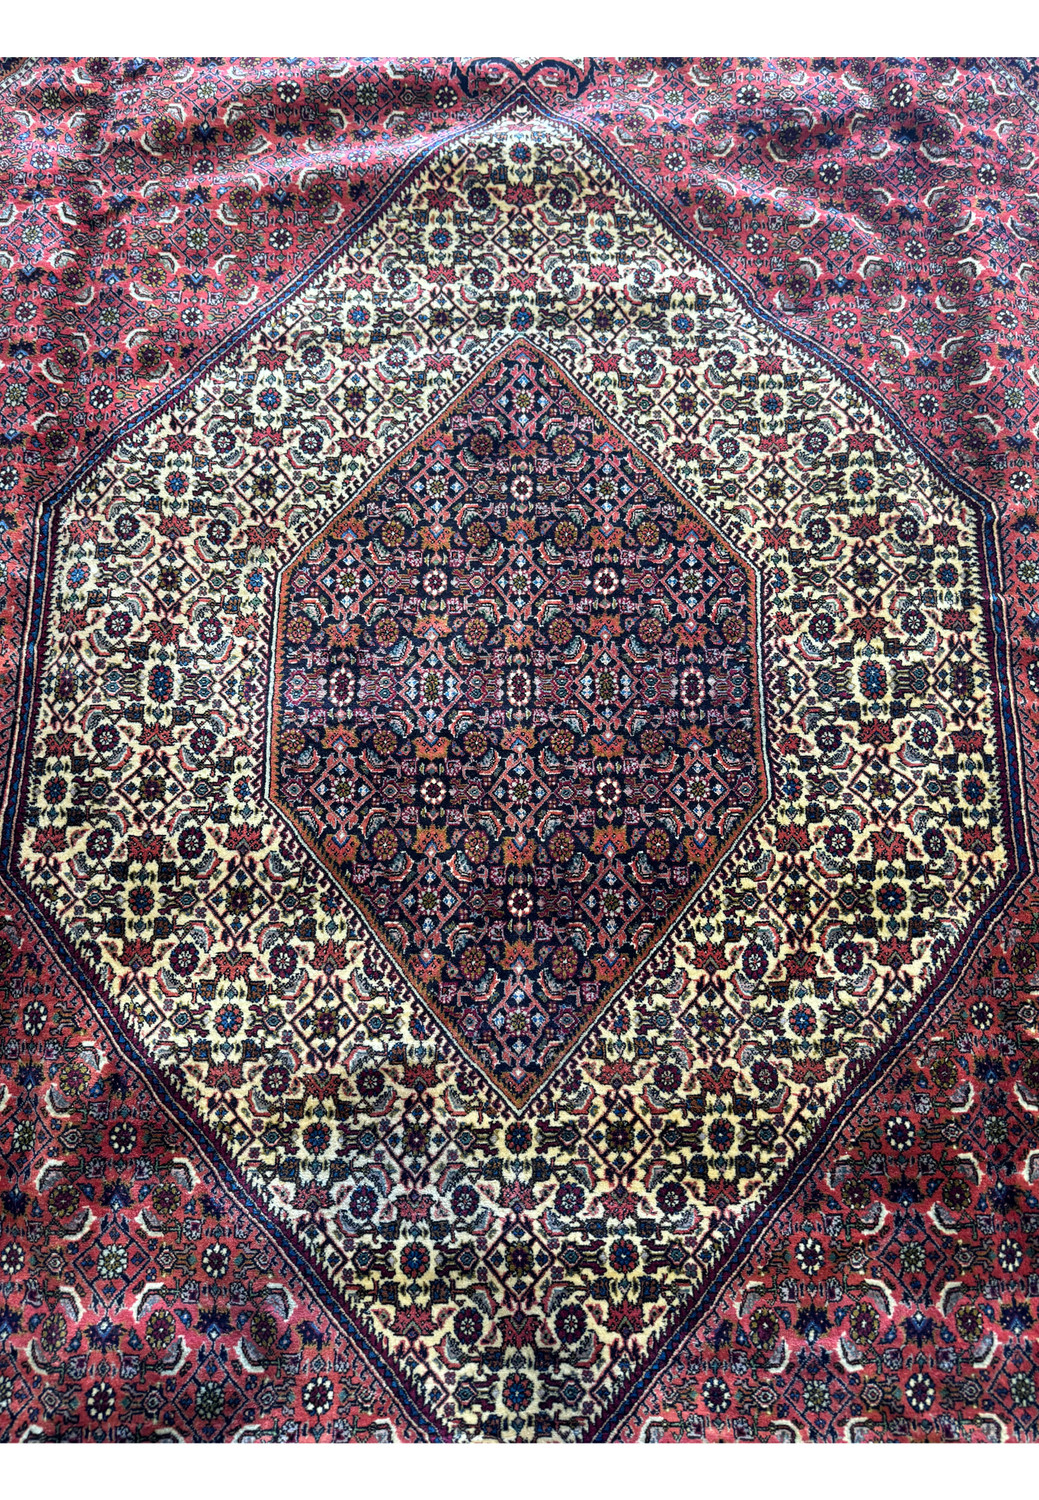 Partially folded Bijar Rug, displaying the thickness and sturdy construction of the weave